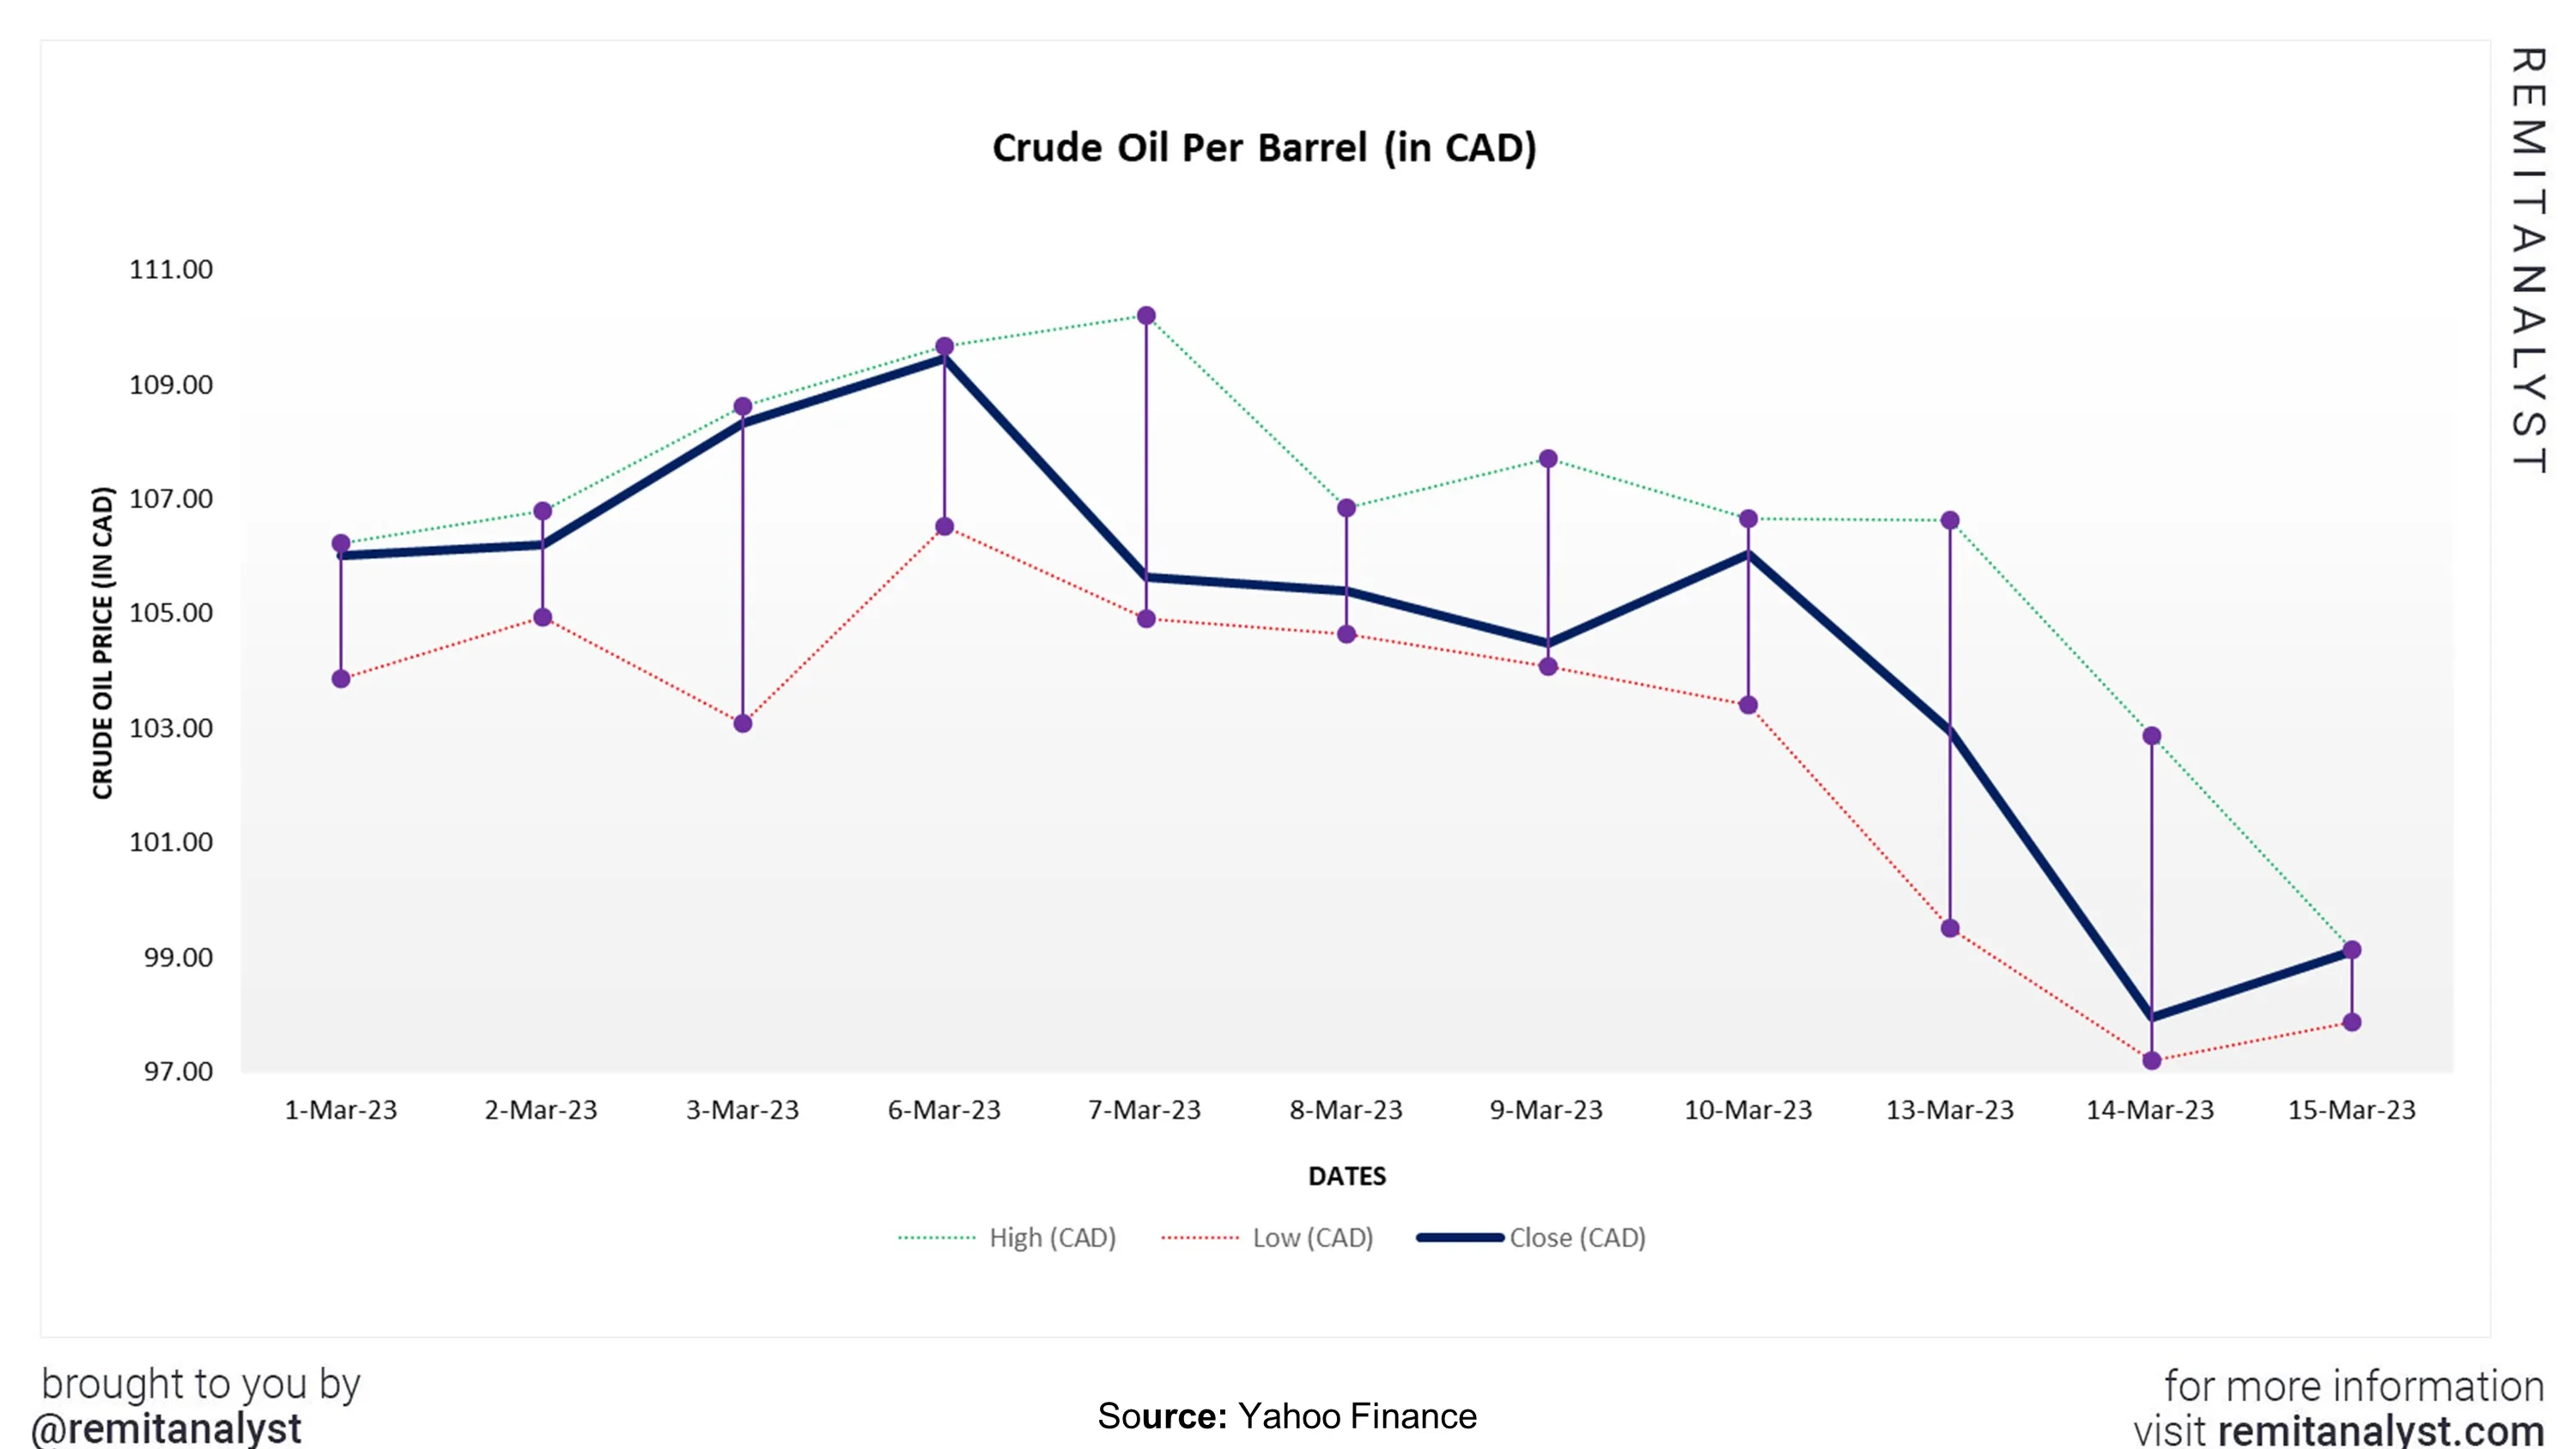 crude-oil-prices-canada-from-1-mar-2023-to-15-mar-2023